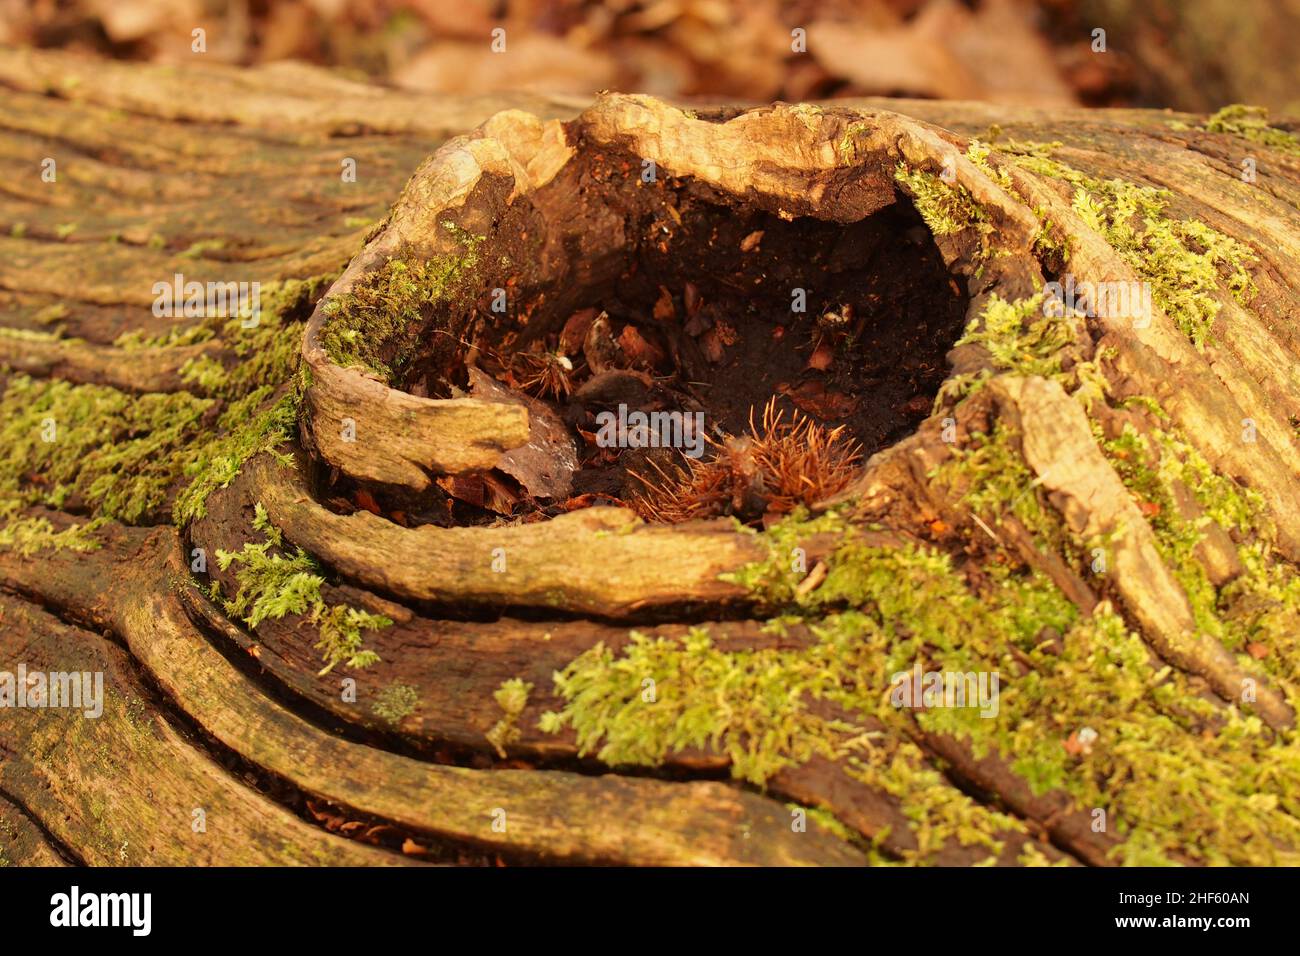 A fallen dead oak tree trunk showing a section with a hole where a branch would have grown from and snapped off surrounded by lichen Stock Photo